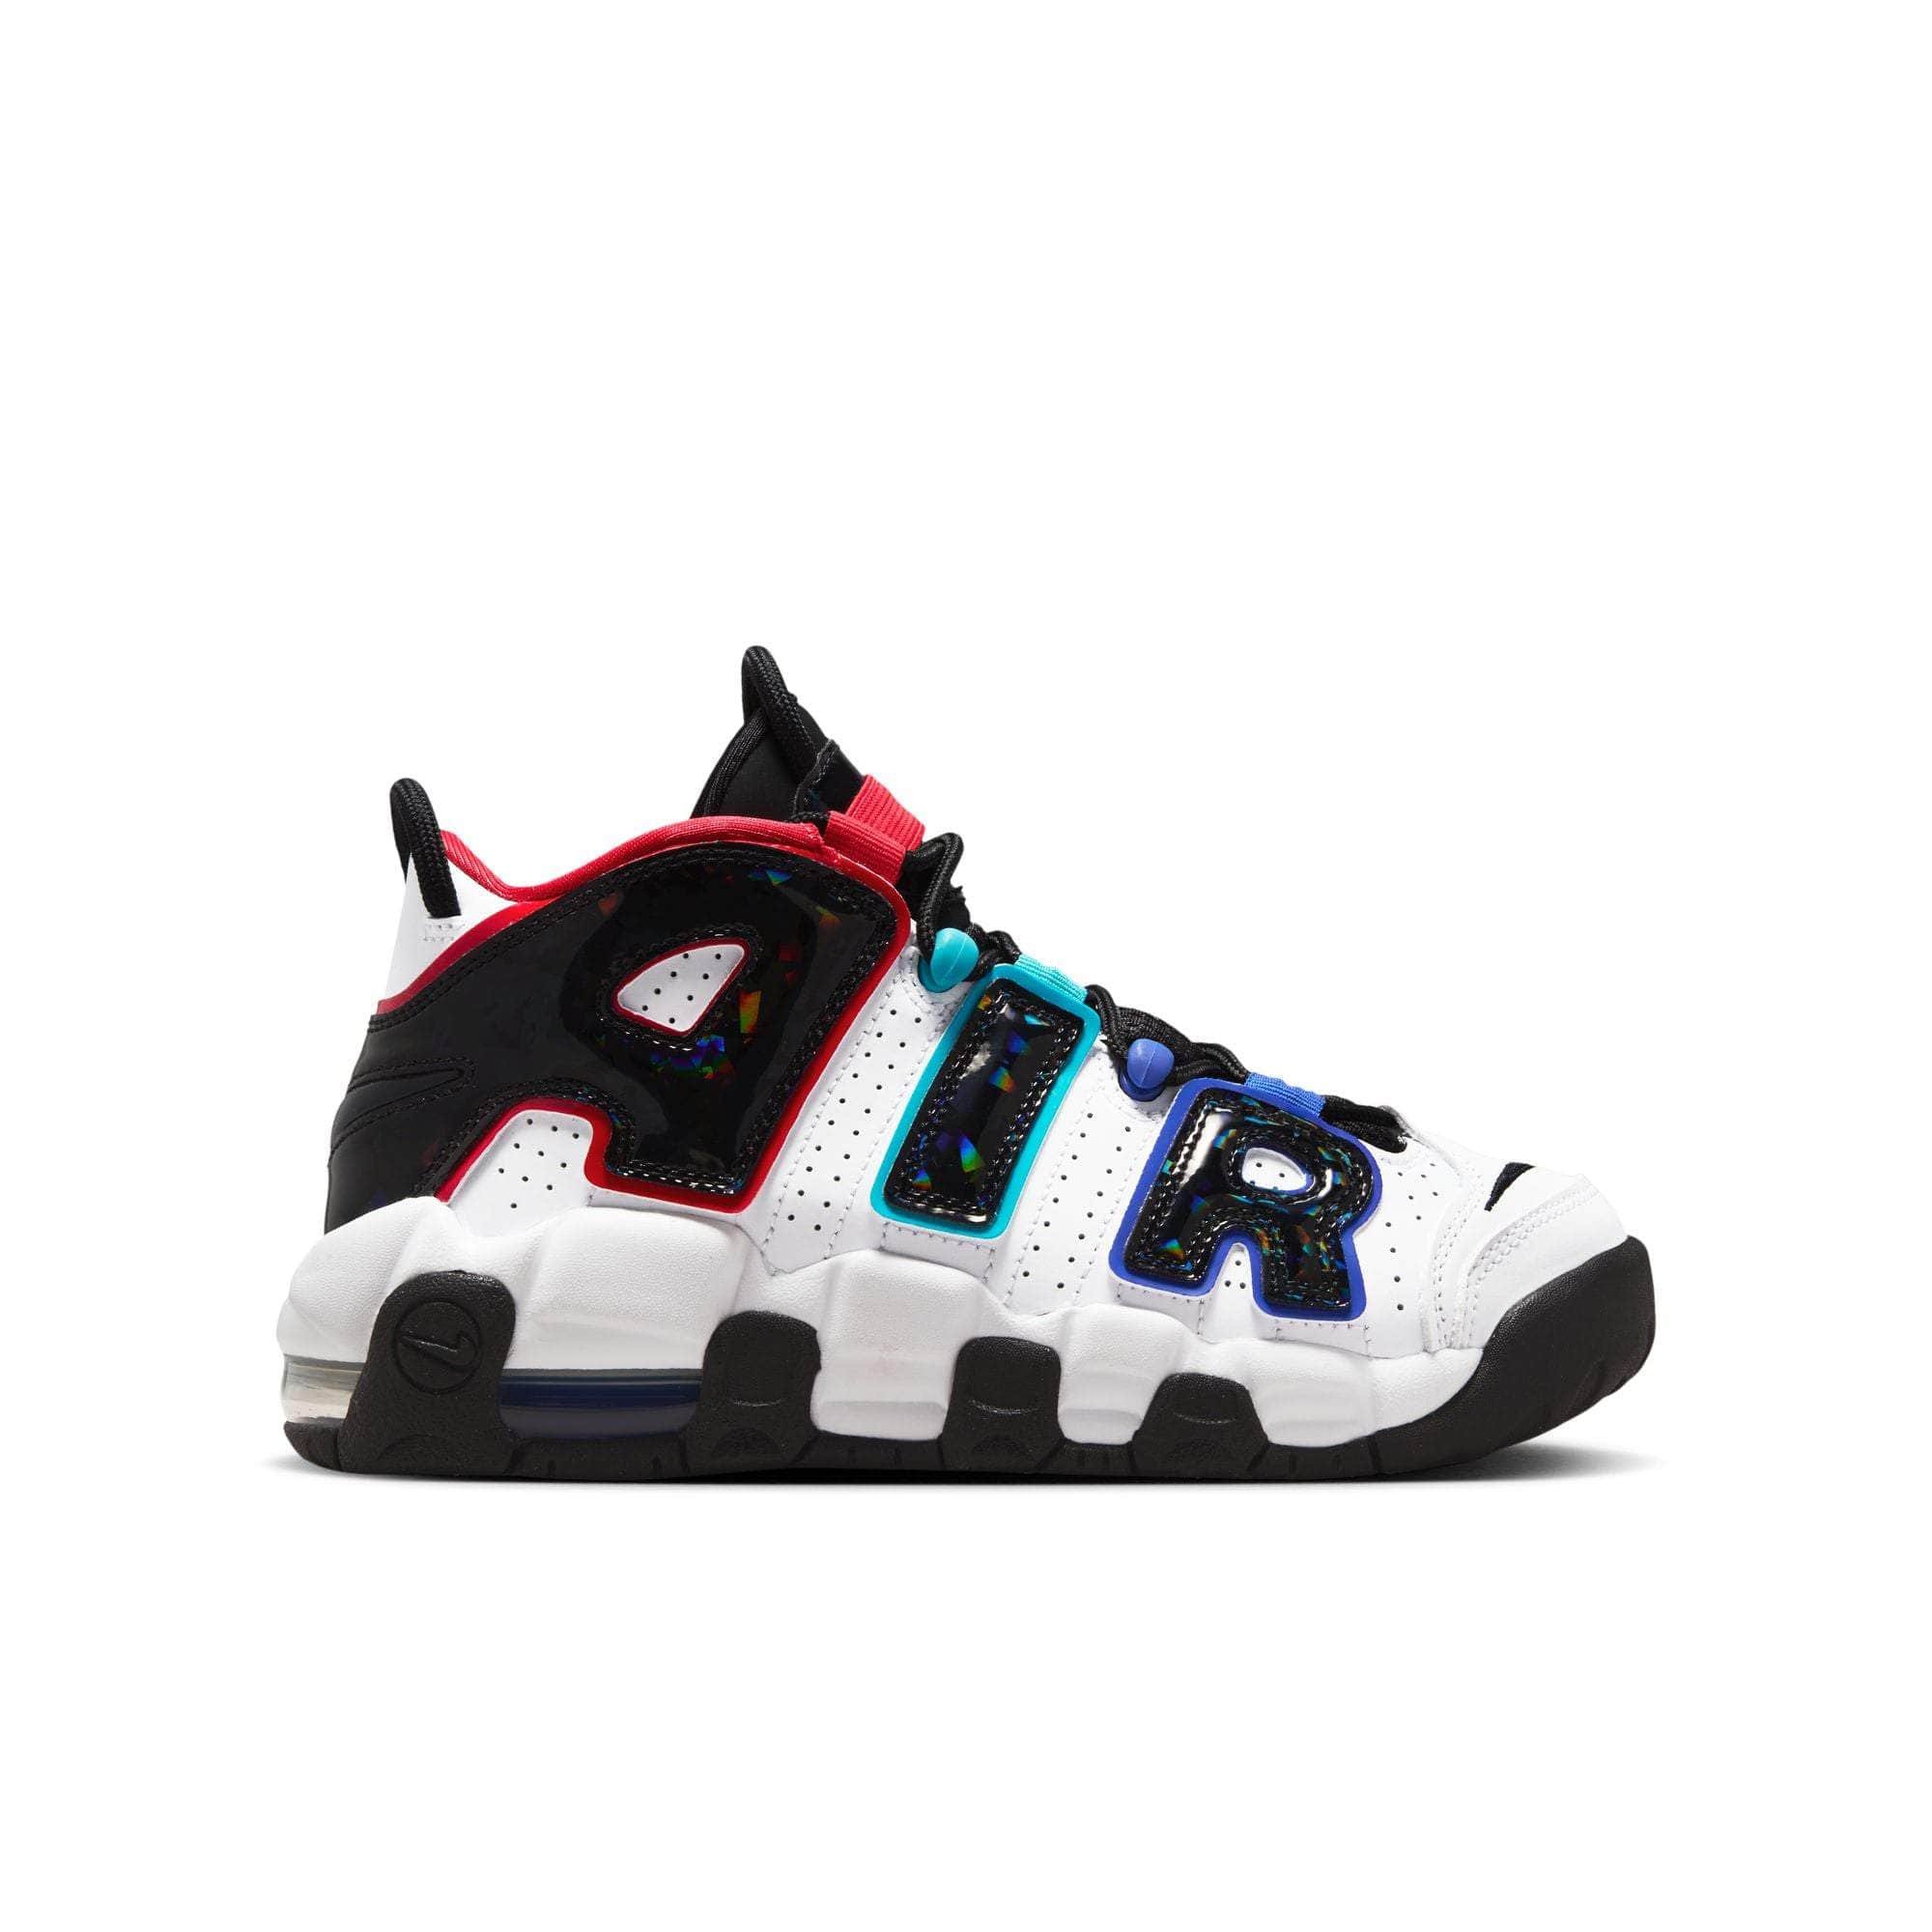 Nike Footwear Nike Air More Uptempo "Prism" - Boy's GS